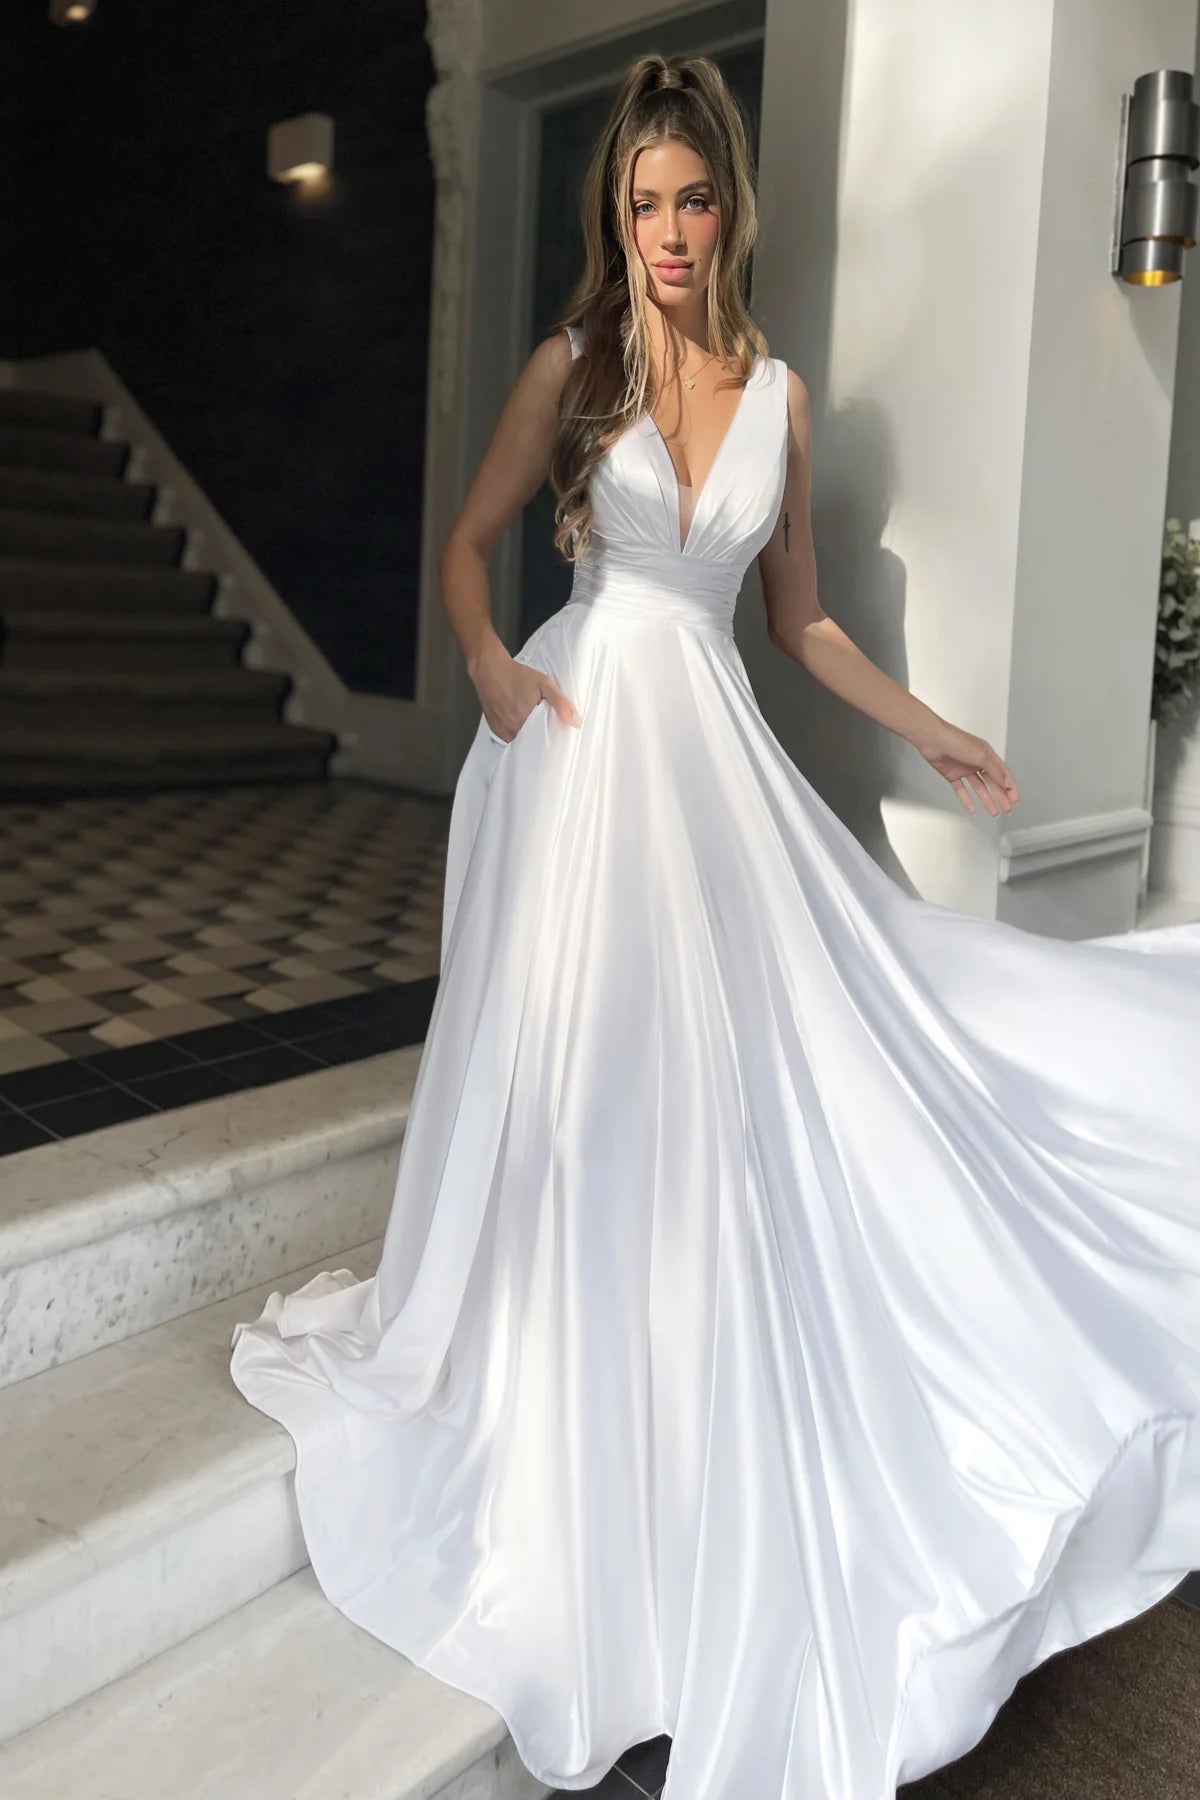 A beautiful satin A-line dress by Jadore, featuring a plunging neckline and slender straps, perfect for bridesmaids, prom, or special occasions.  Available at Madeline's Boutique in Boca Raton and Toronto, Ontario.